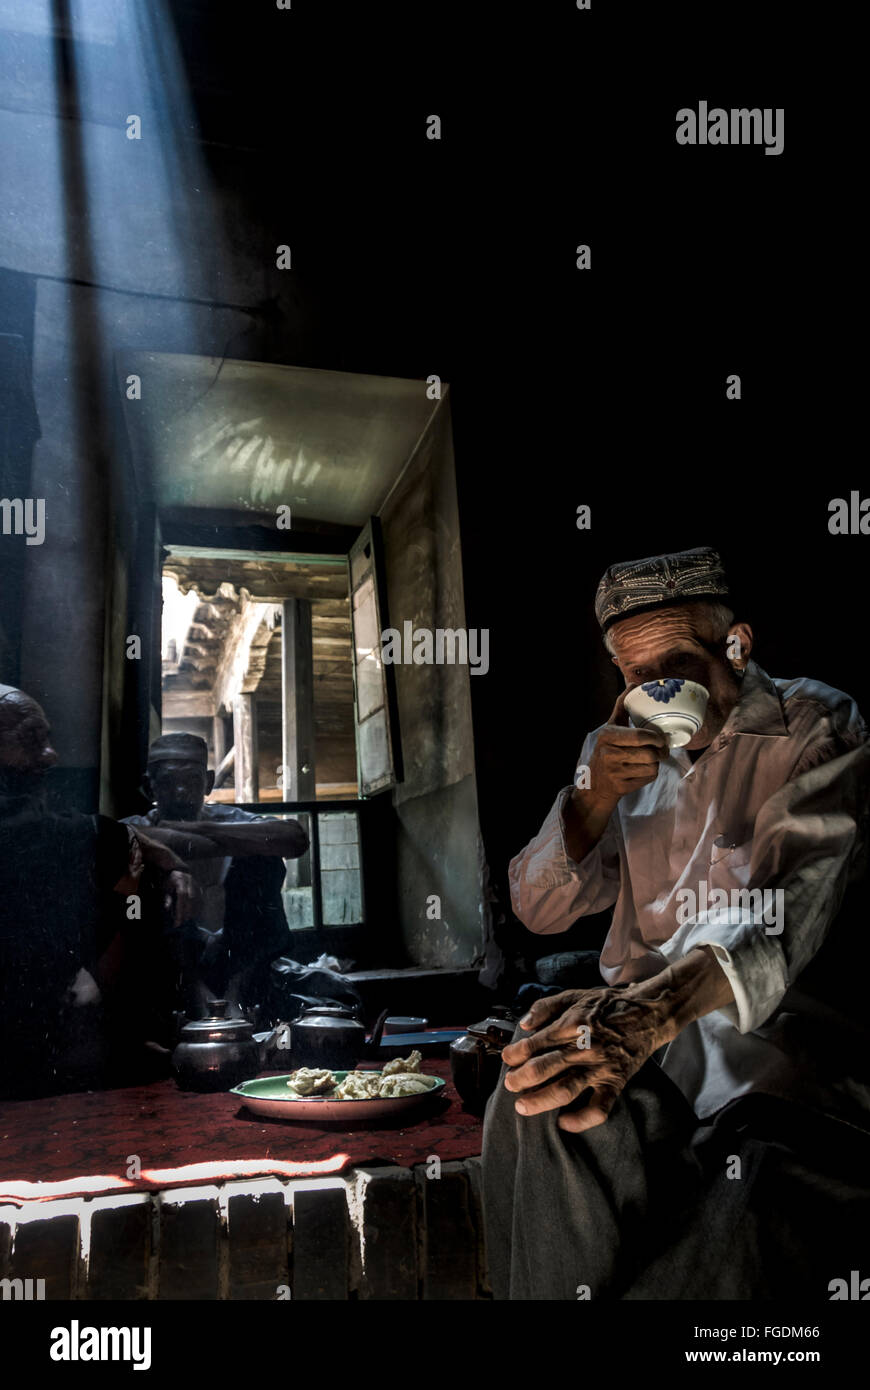 Uigur people eating in a small, dark restaurant. Stock Photo